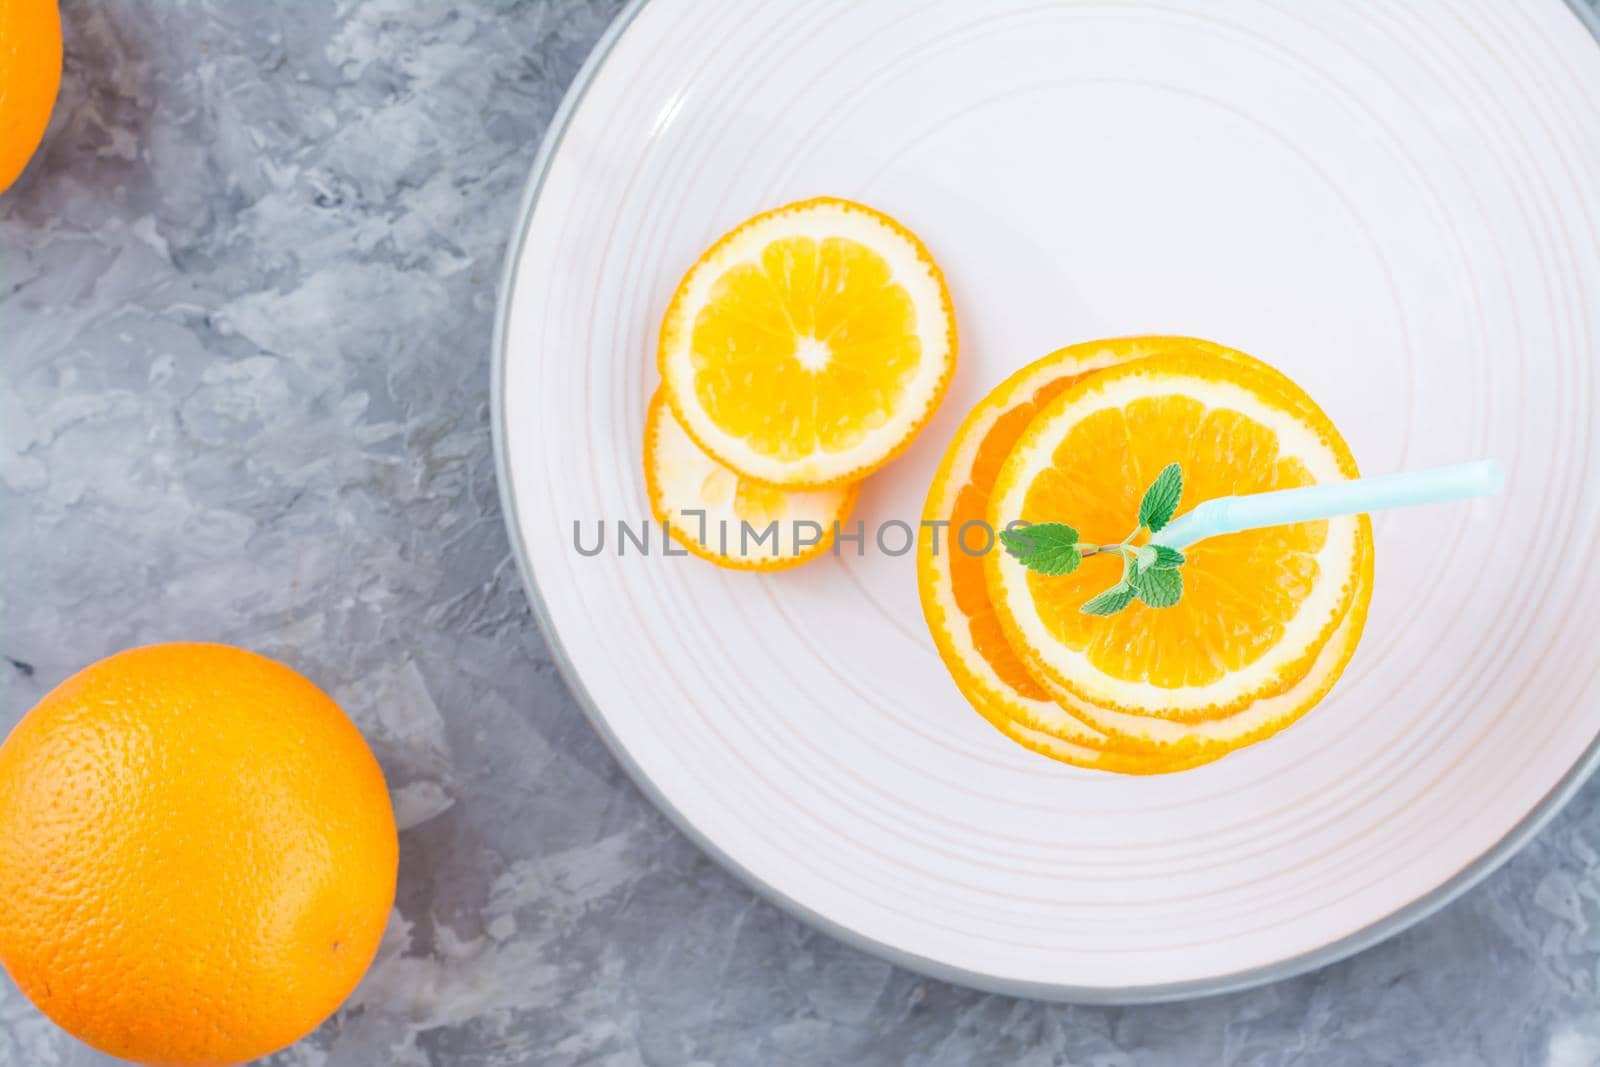 Fresh orange slices in a stack, mint leaves and a straw for a drink. Simulated orange juice. Top view